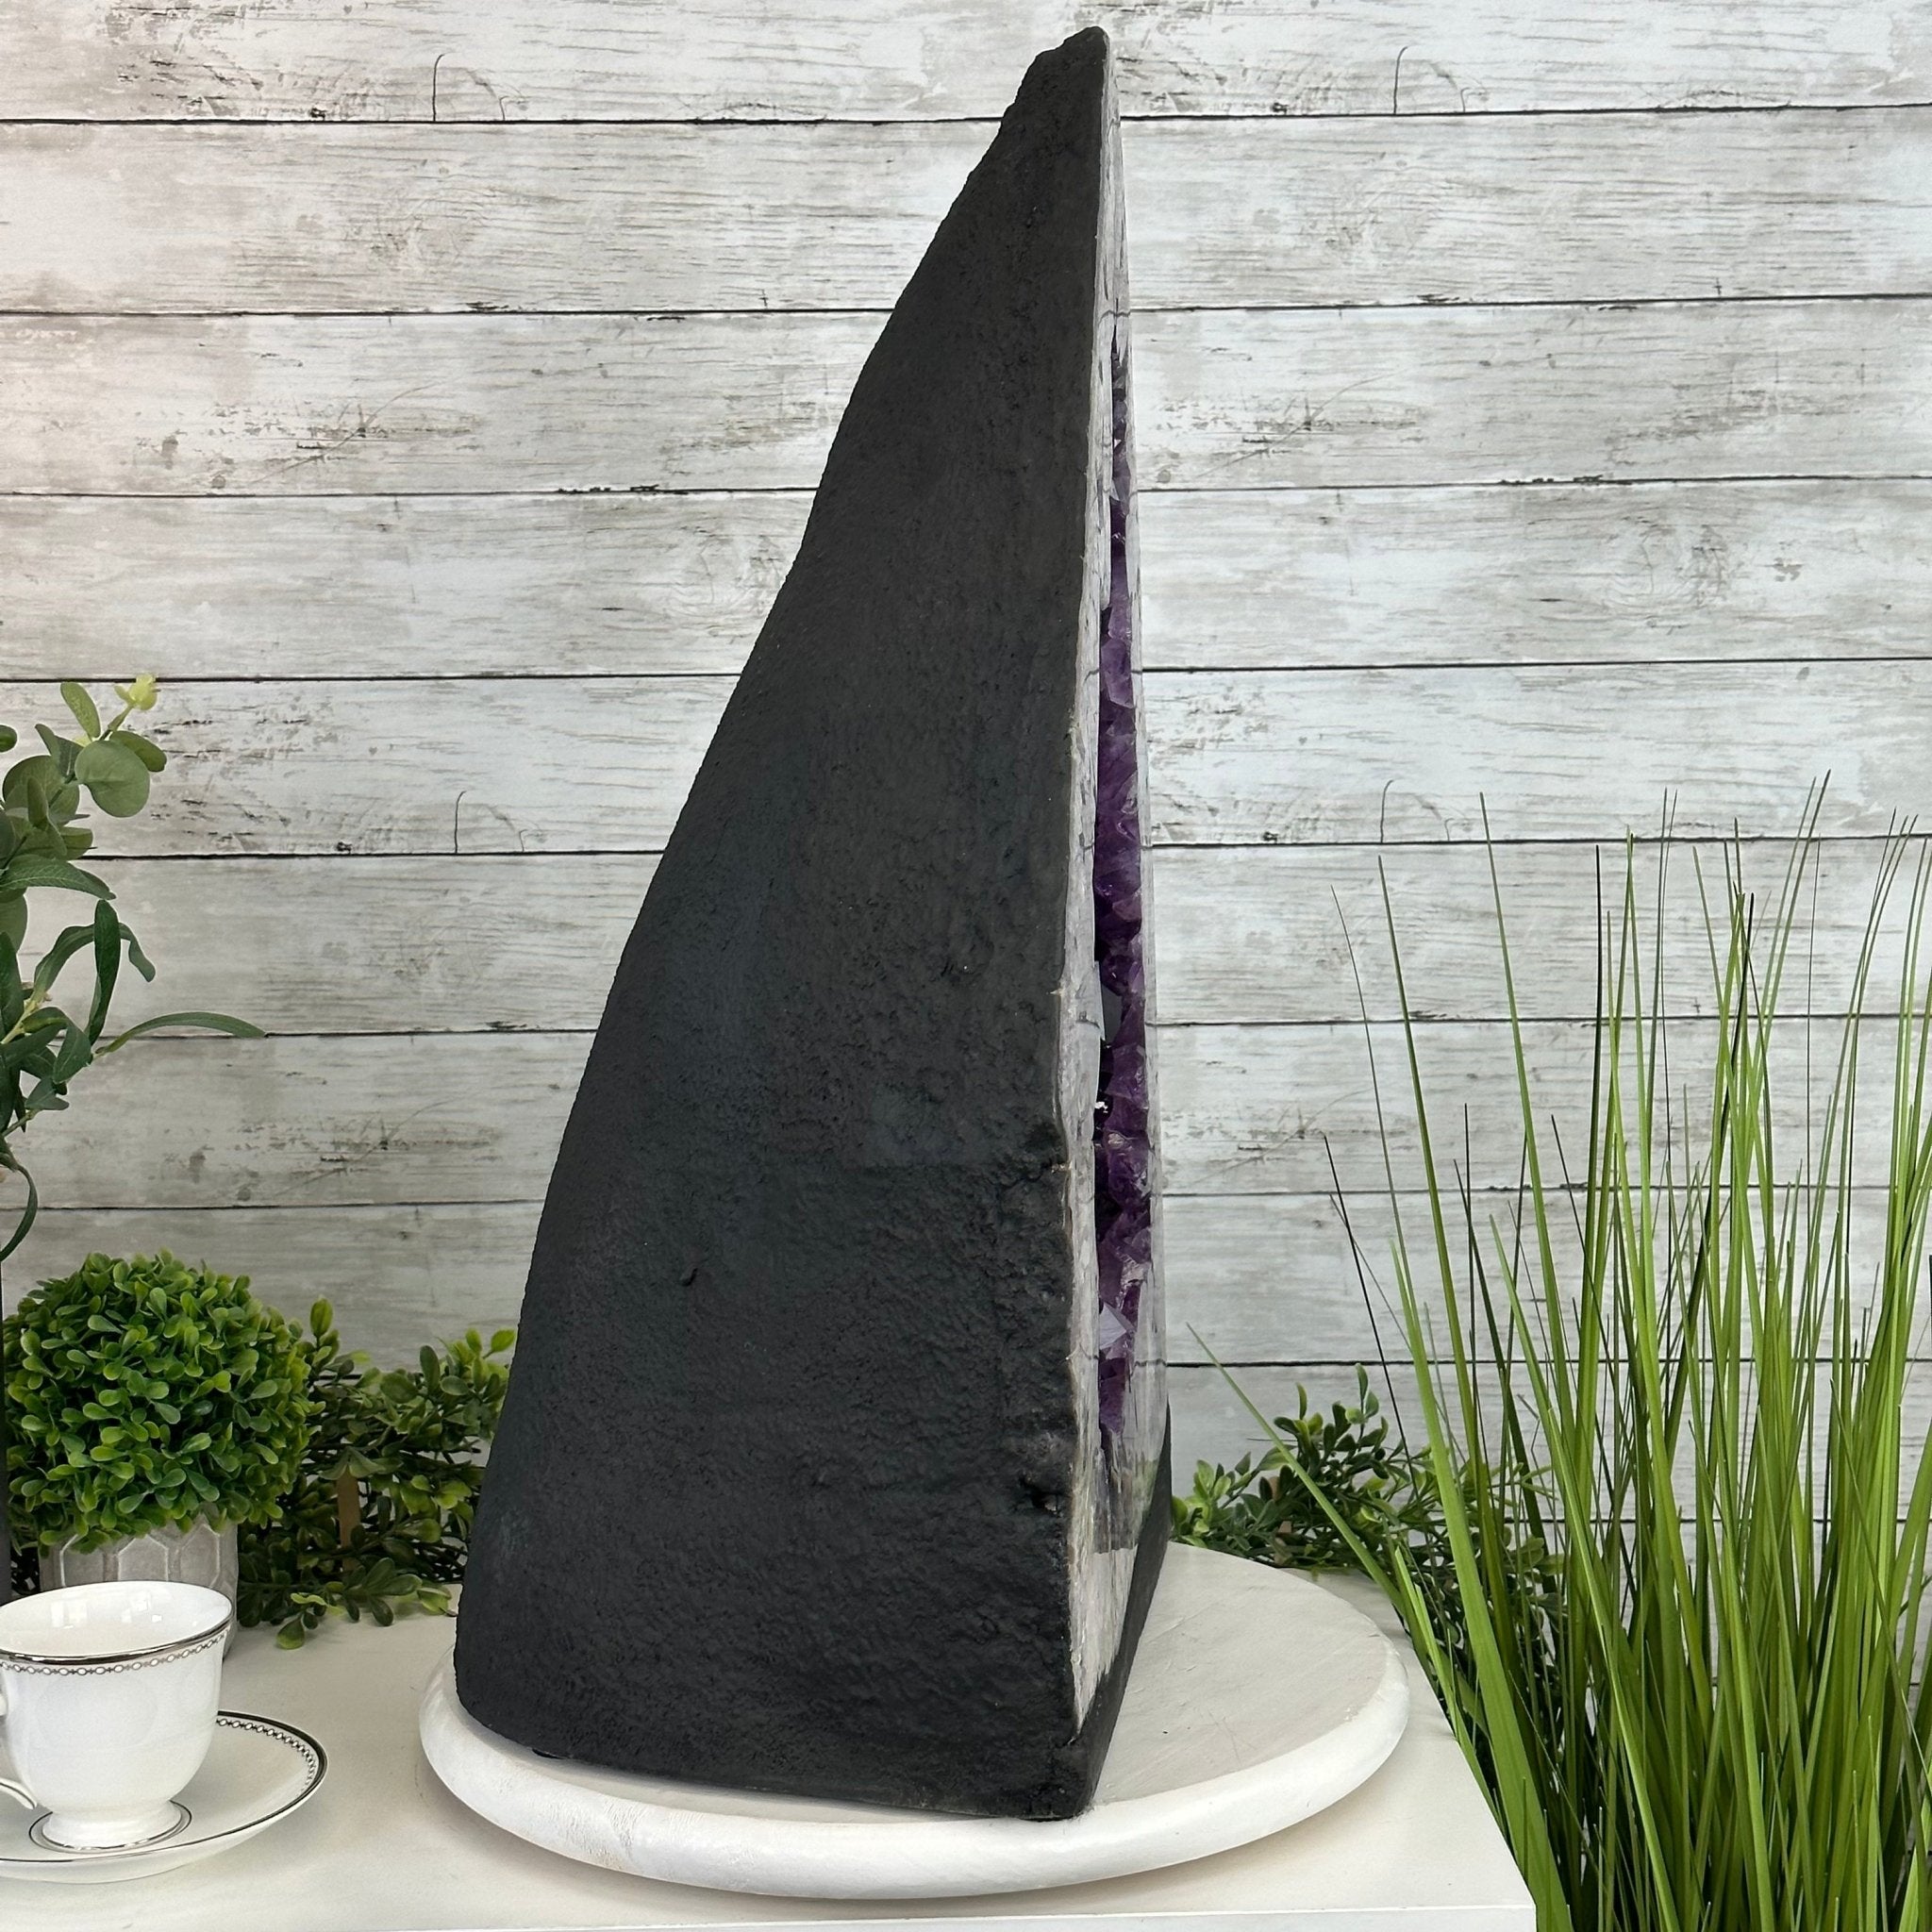 Super Quality Brazilian Amethyst Cathedral, 93.2 lbs & 22.1" Tall, Model #5601-1181 by Brazil Gems - Brazil GemsBrazil GemsSuper Quality Brazilian Amethyst Cathedral, 93.2 lbs & 22.1" Tall, Model #5601-1181 by Brazil GemsCathedrals5601-1181